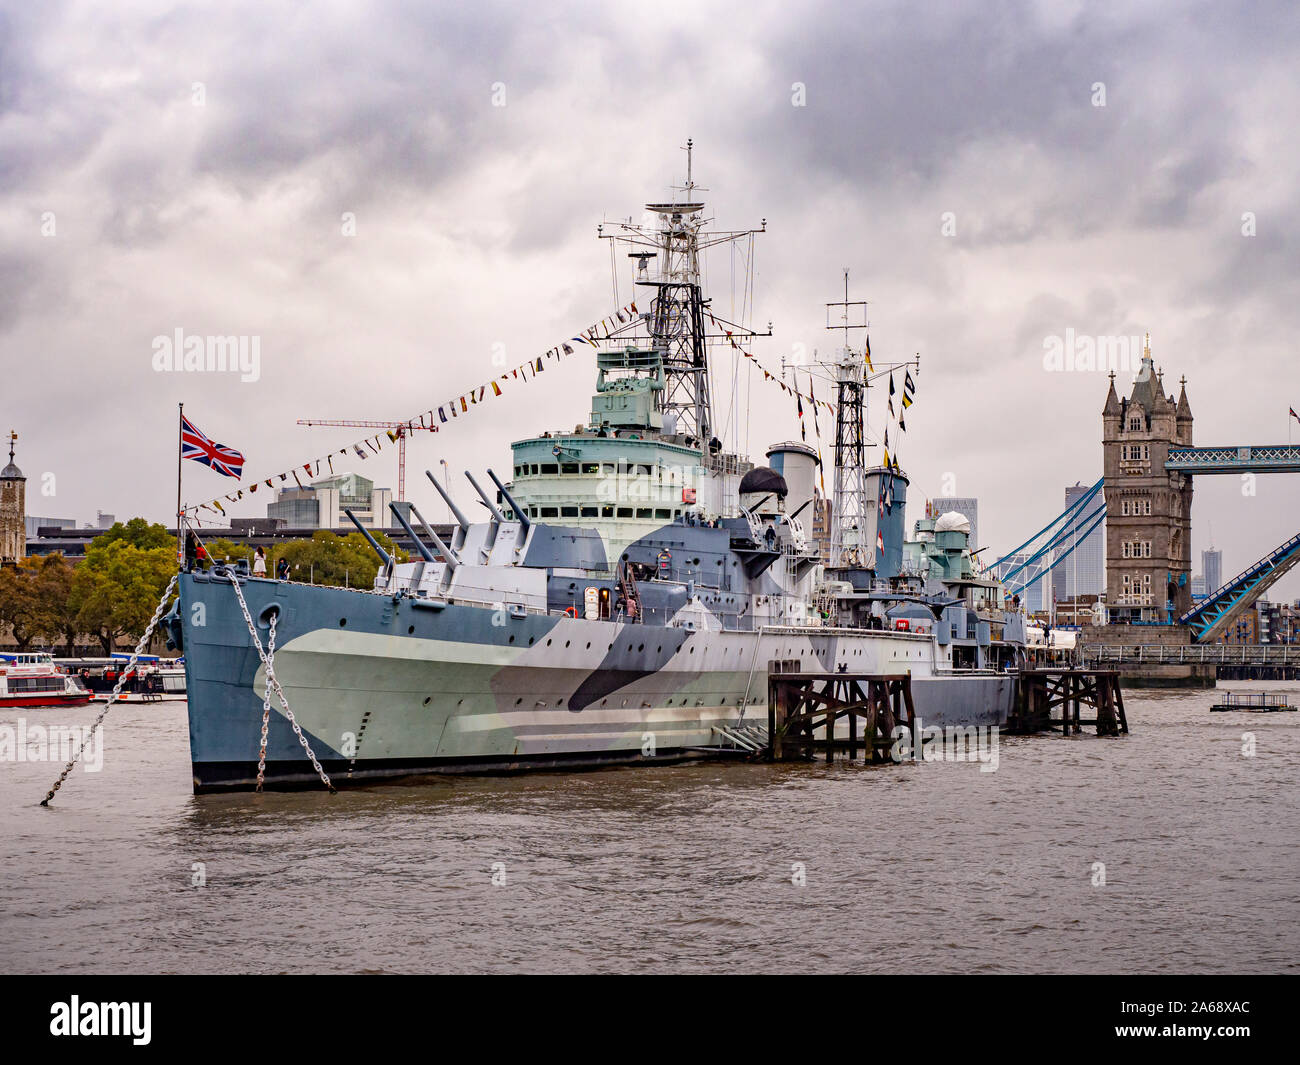 HMS Belfast, a Town-class light cruiser built for the Royal Navy. Now operated by the Imperial War Museum and permanently moored on the River Thames, Stock Photo